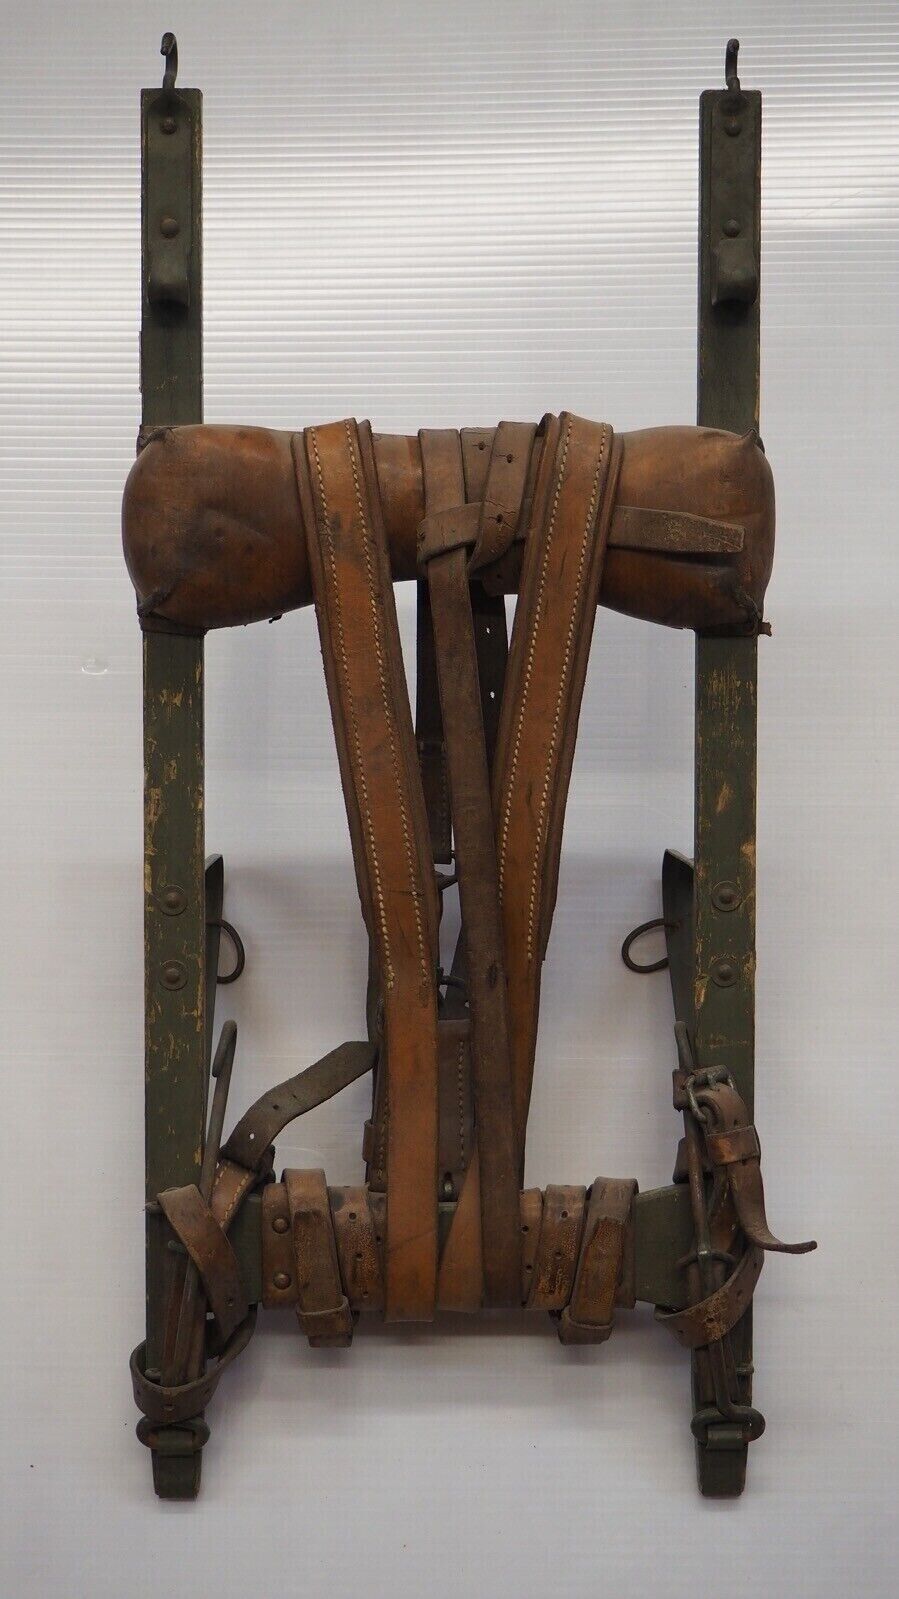 VINTAGE 1940'S SWISS ARMY WOODEN FRAME BACKPACK